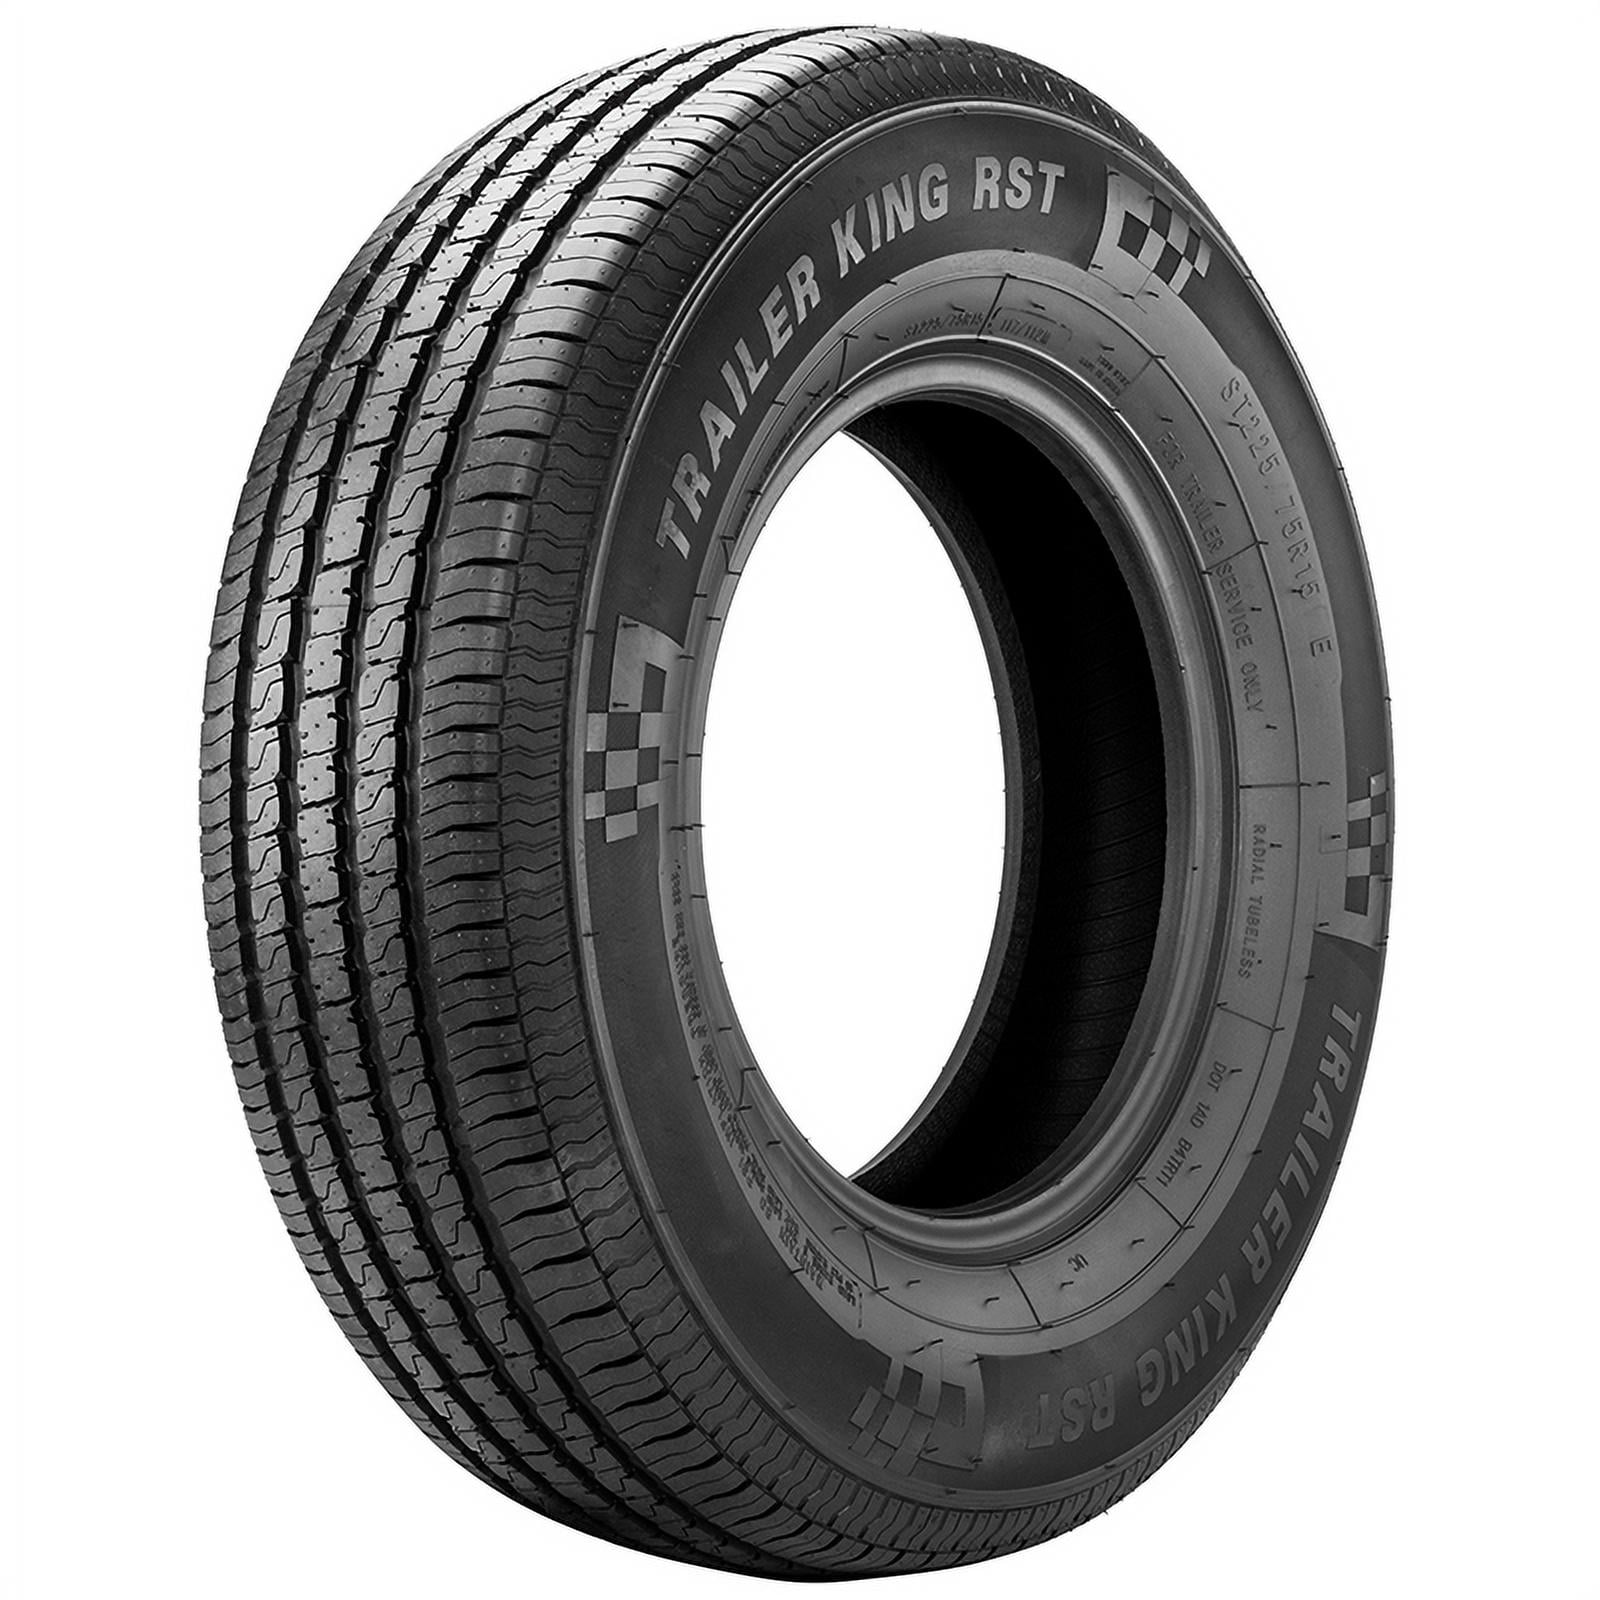 Trailer King RST ST185/80R13 95M 8-Ply Trailer Tire